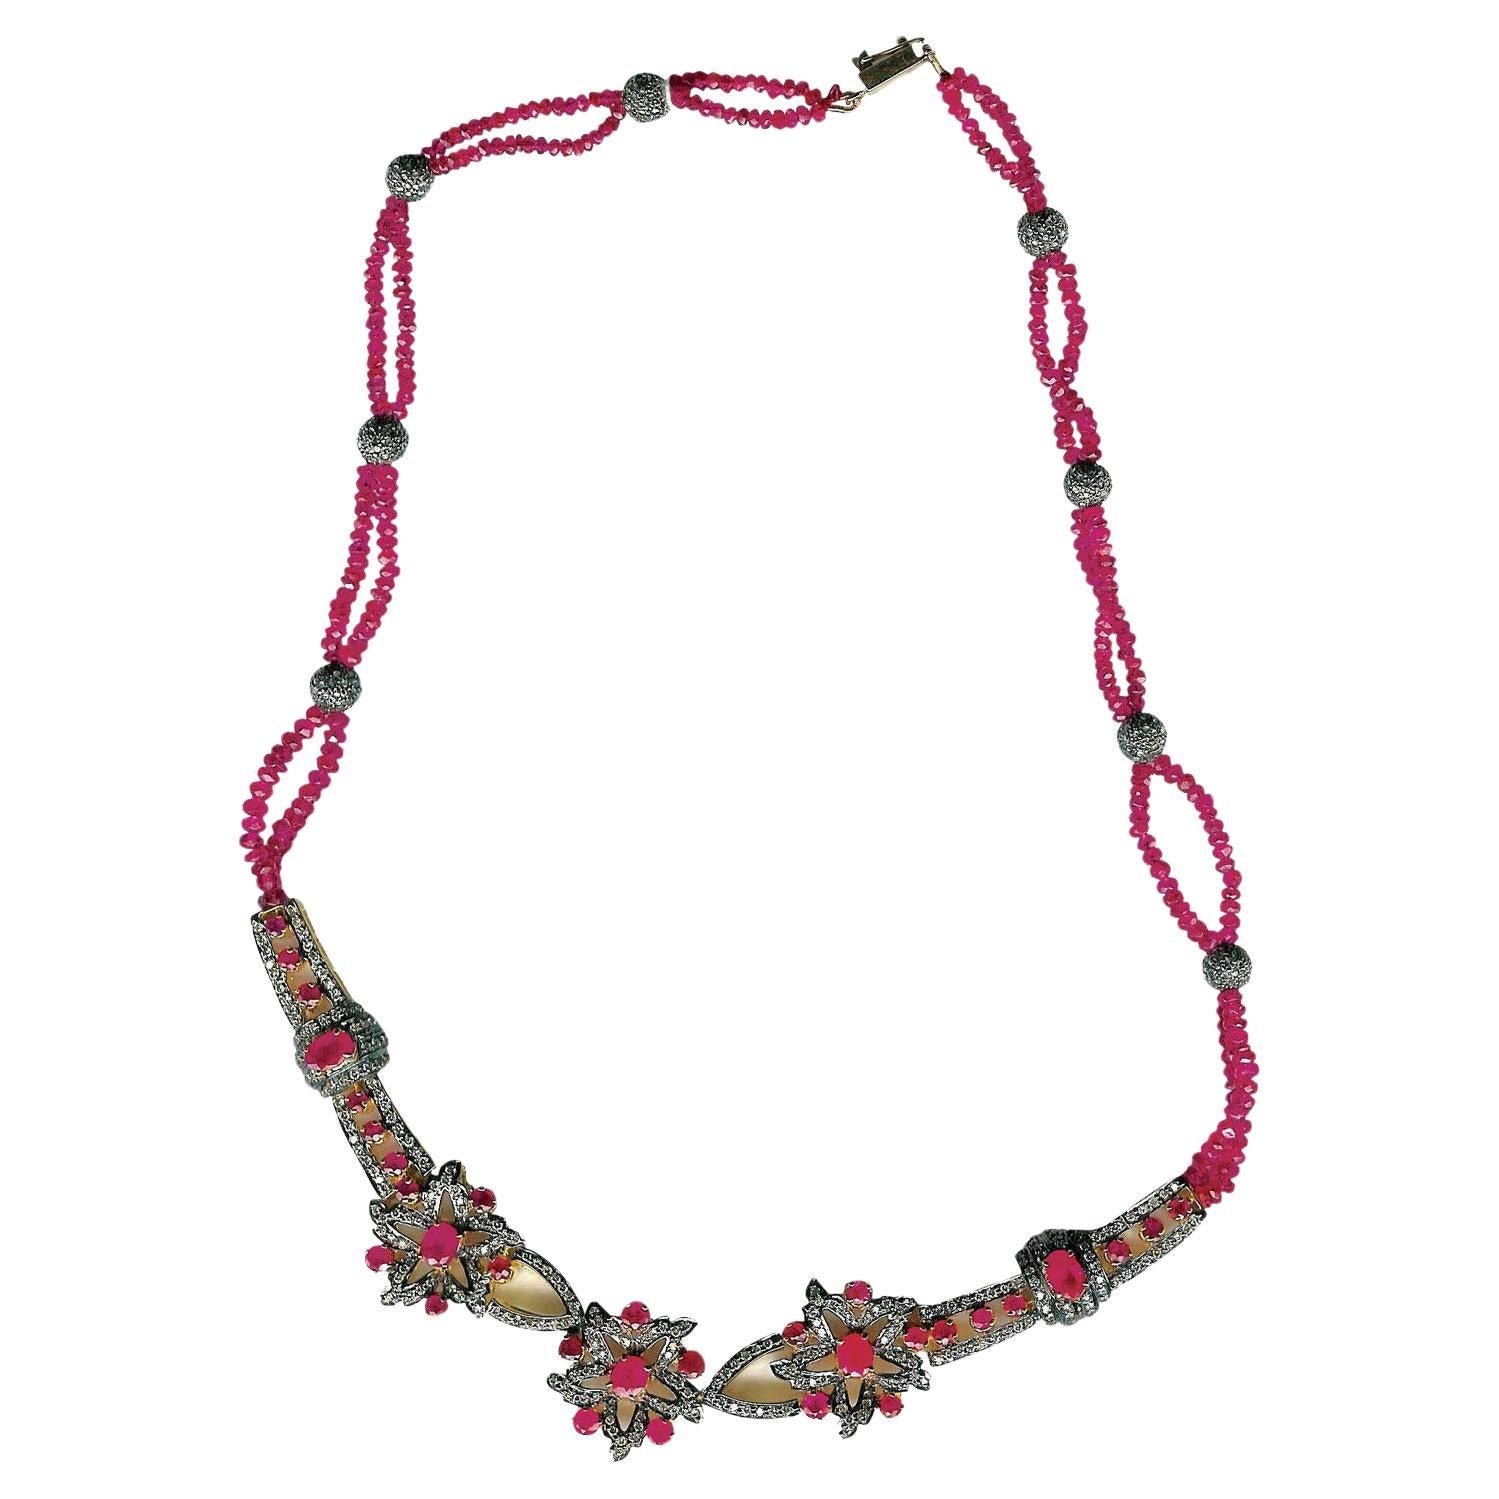 Ethnic Looking Ruby Beaded Necklace With Diamonds Made In 18k Yellow Gold For Sale